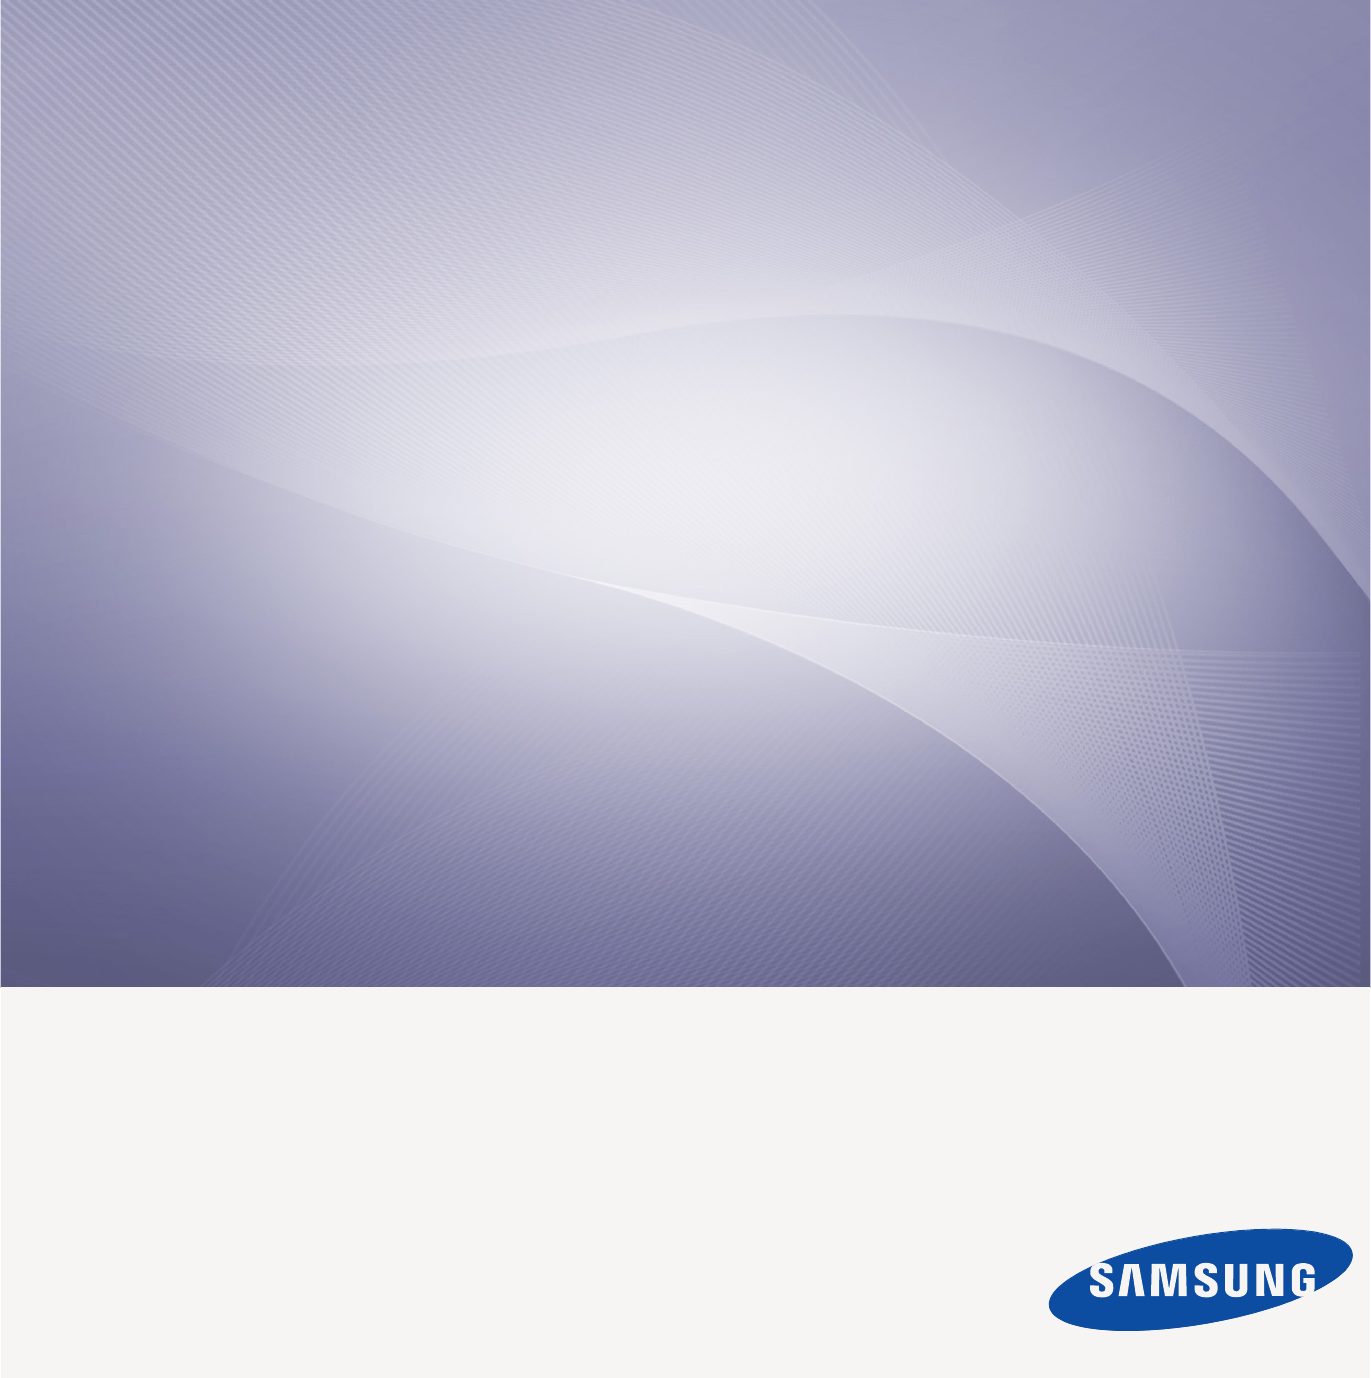 One hundred years Size Interpret Samsung SCX-4825FN User Manual download pdf